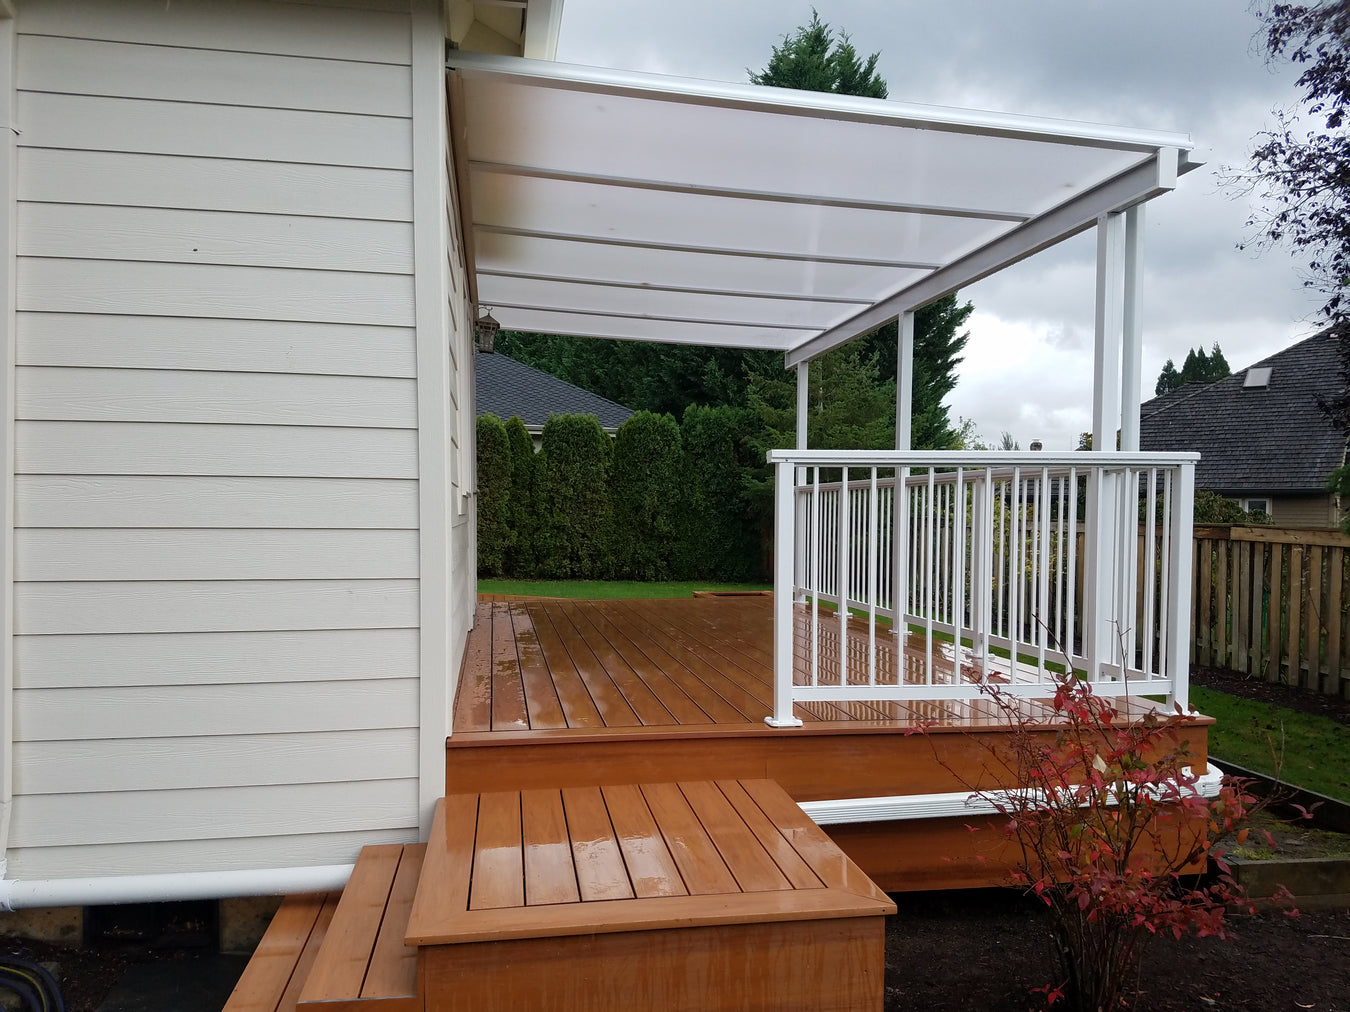 Patio Covers & Supplies